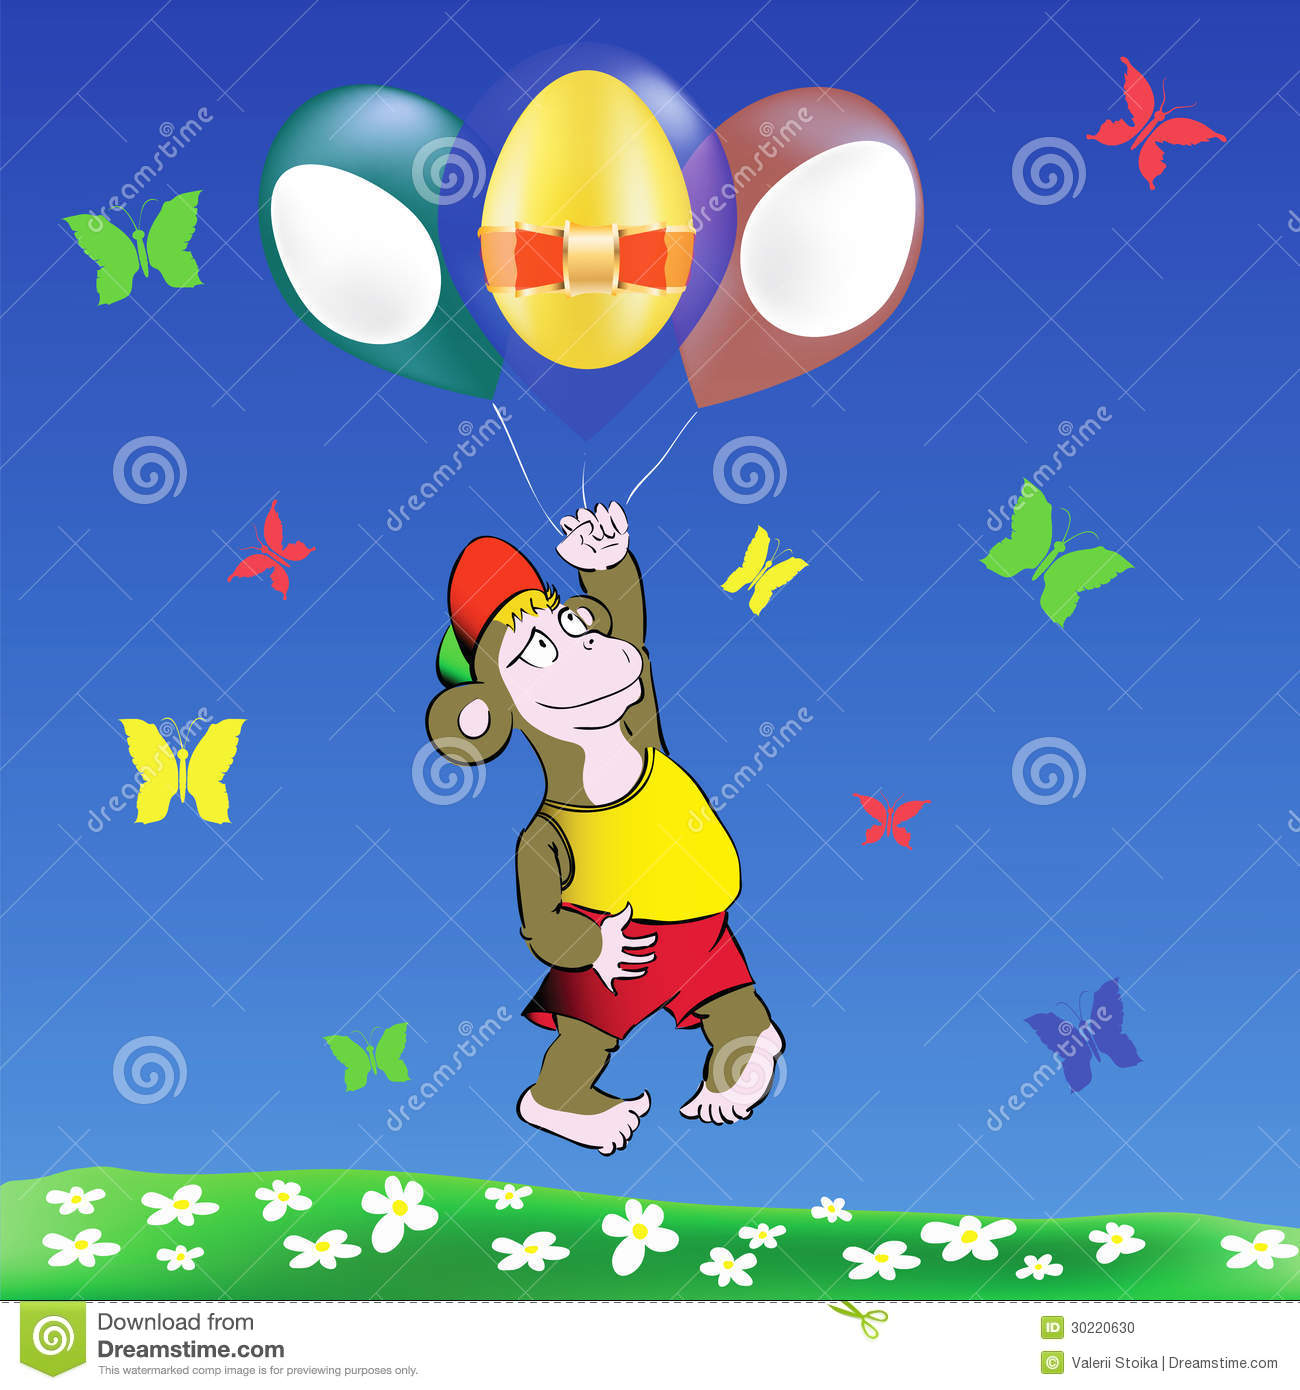 Colorful Illustration With Monkey And Easter Eggs Balloons For Your